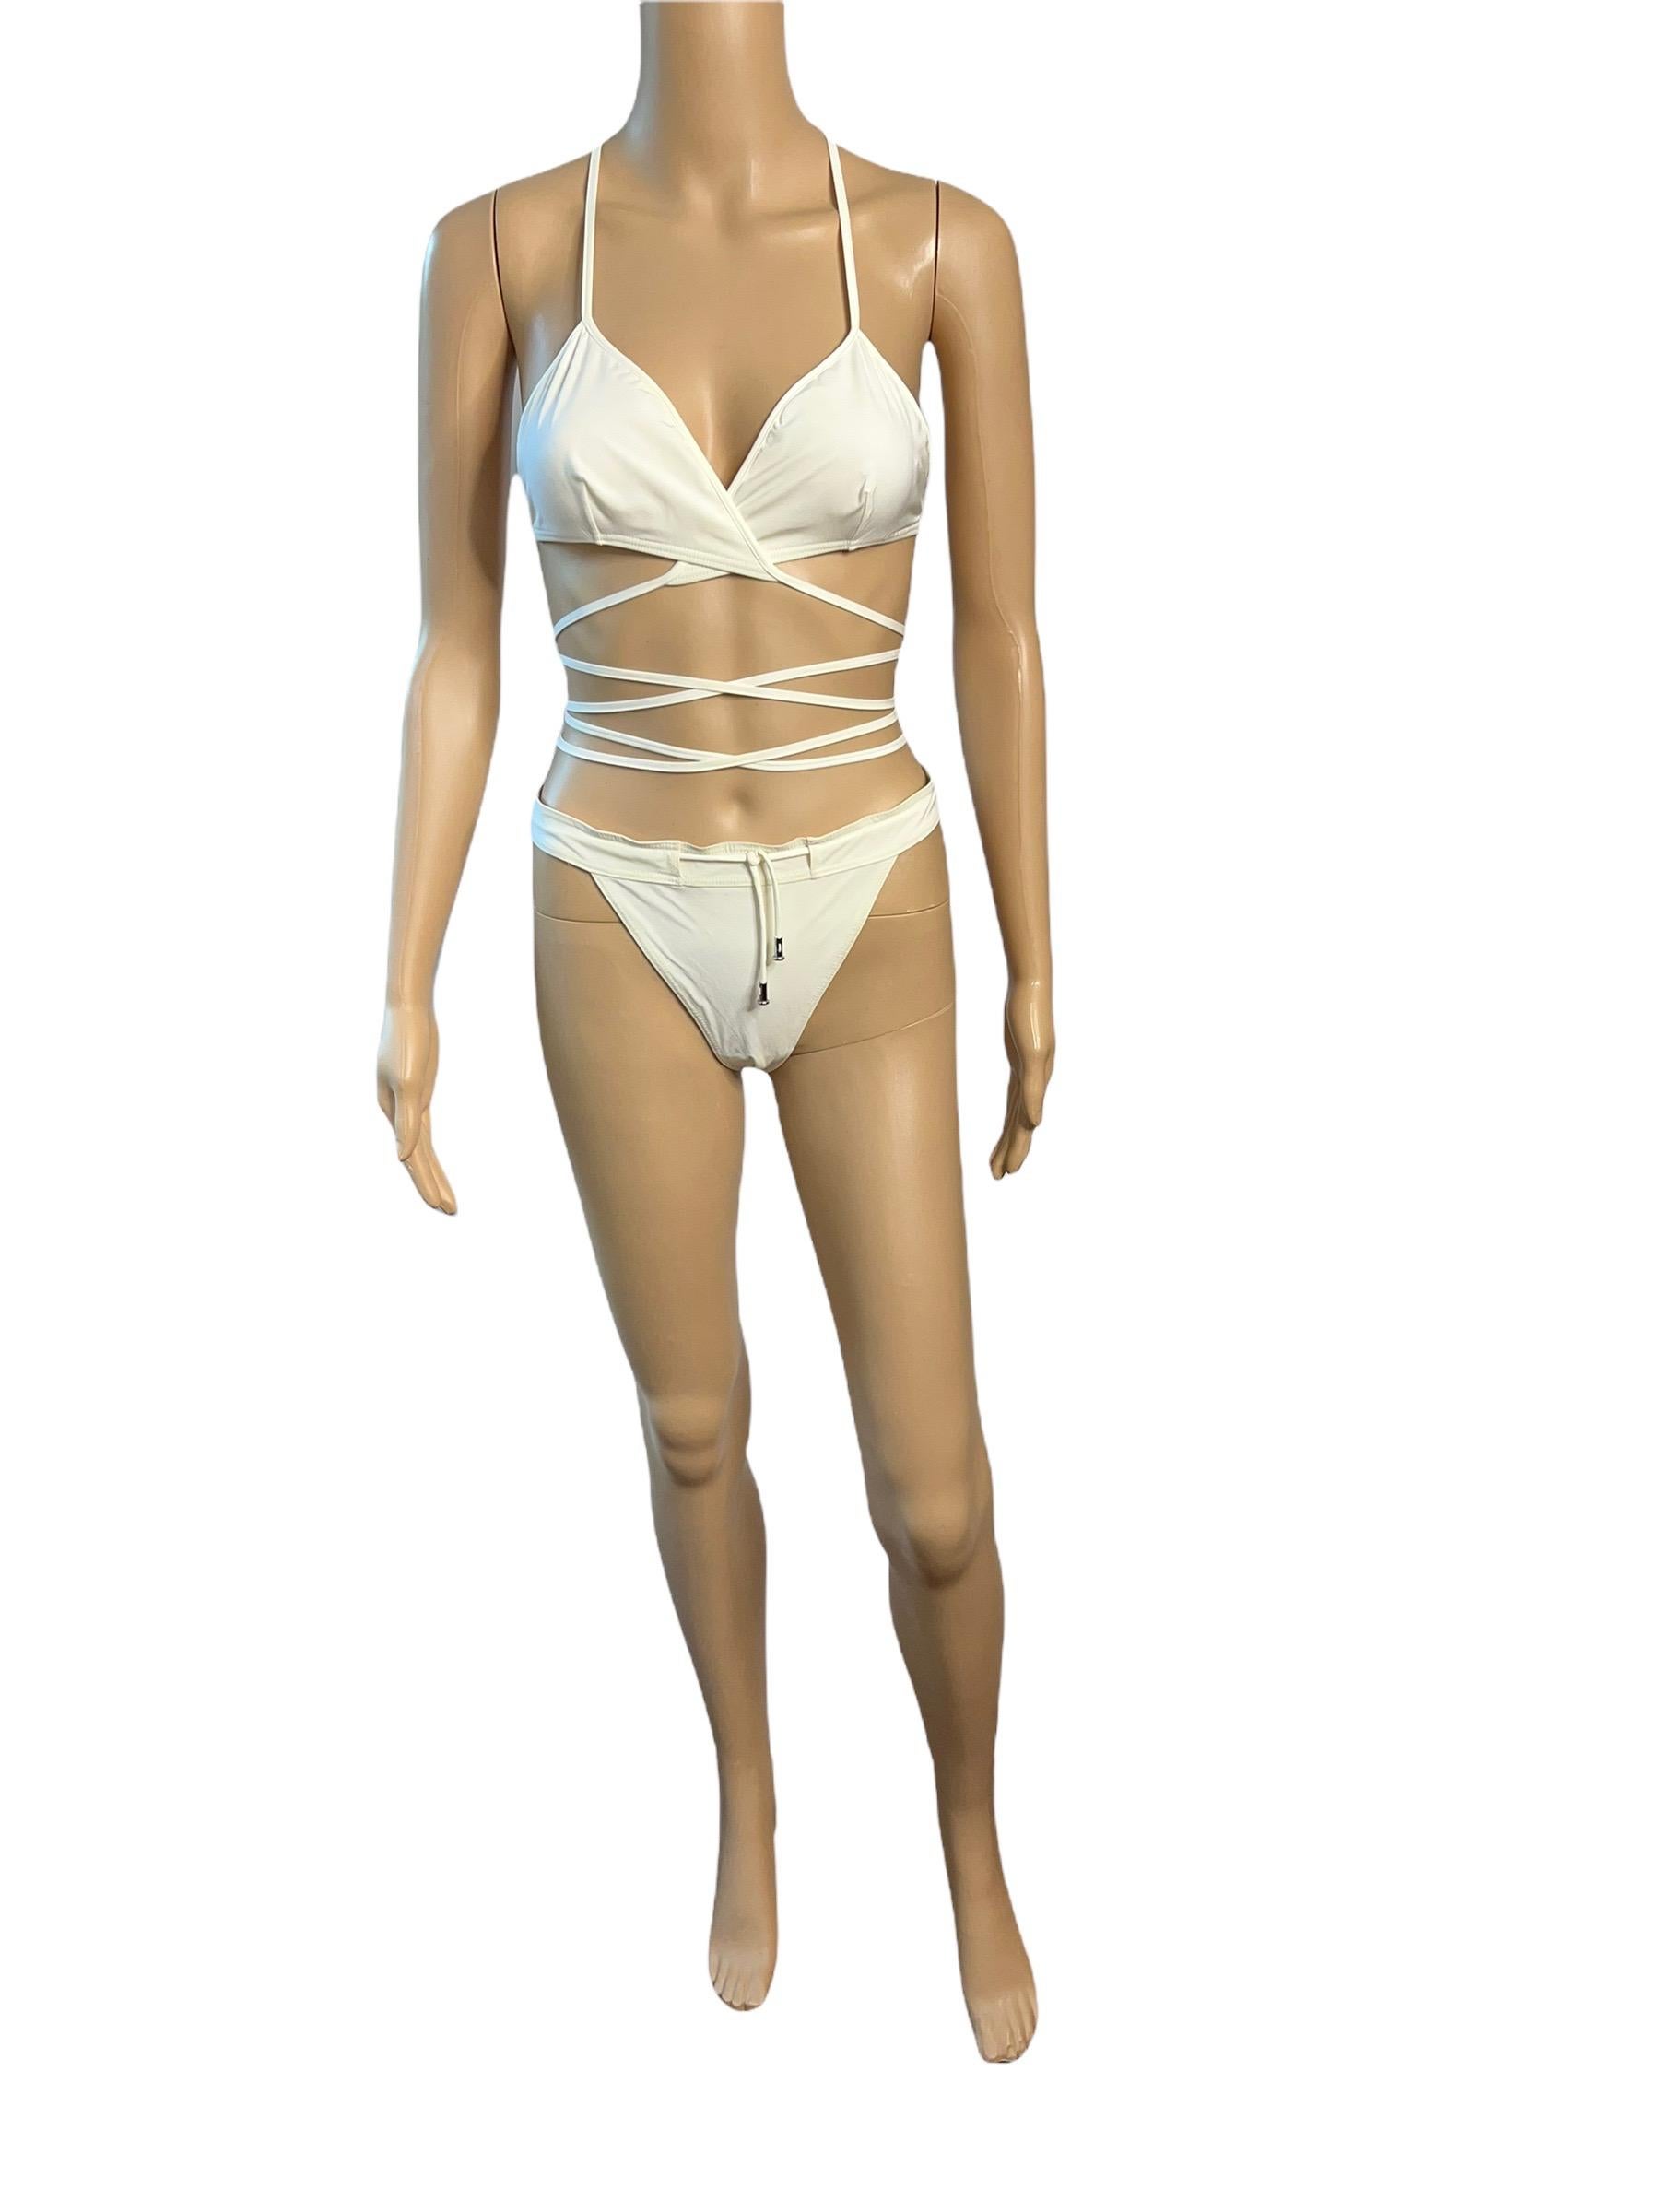 Tom Ford for Gucci S/S 2000 Runway Wrap Ivory Two-Piece Bikini Swimsuit Swimwear Size L

Look 29 from the Spring 2000 Collection.
